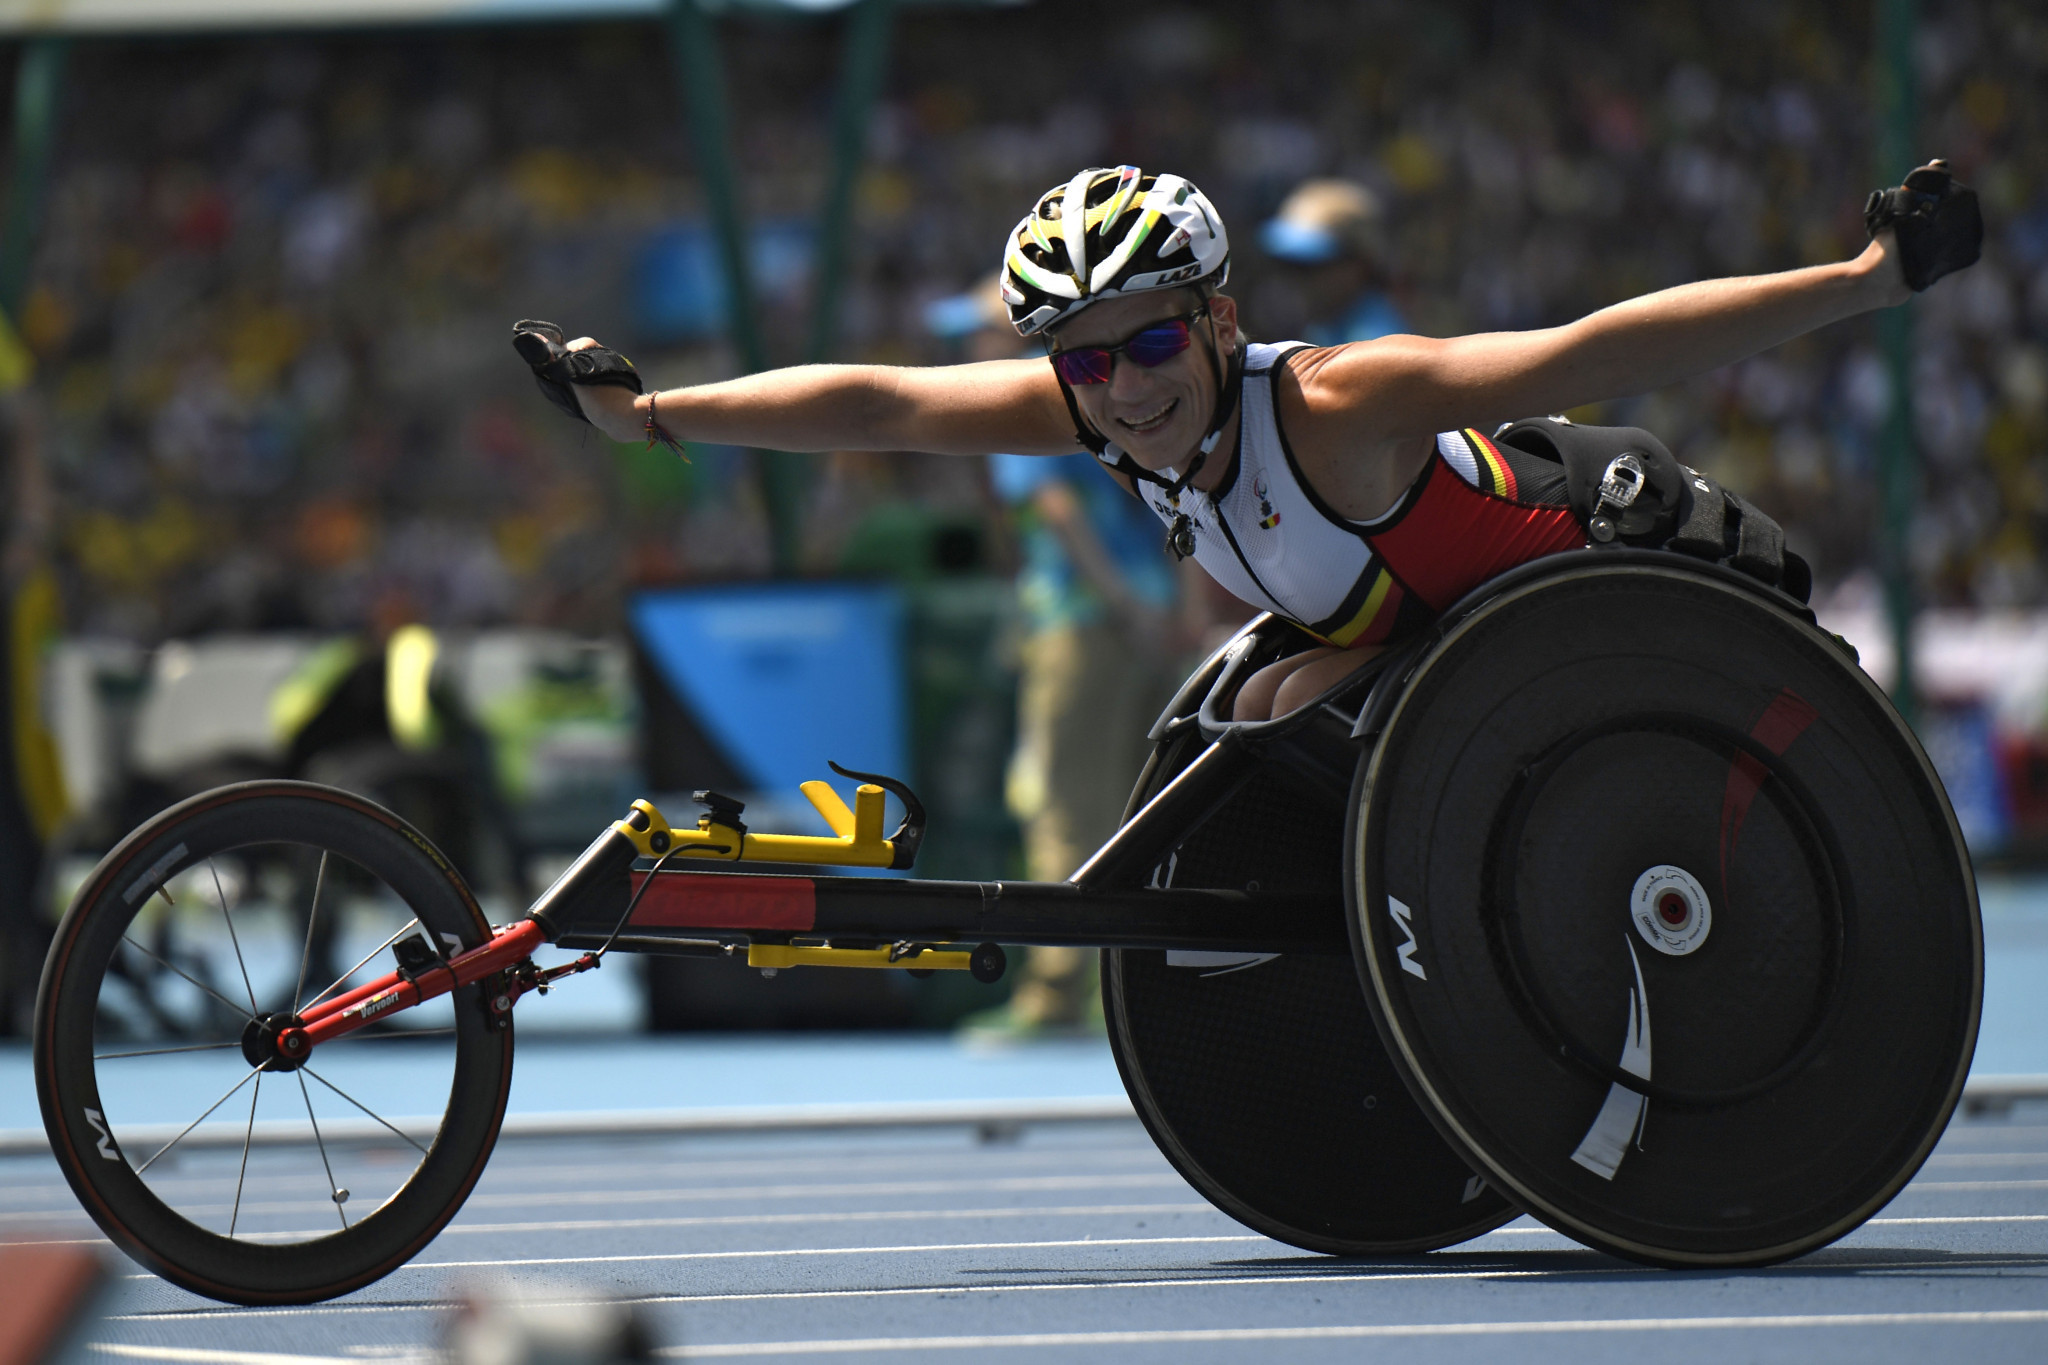 Marieke Vervoort won two of her four Paralympic medals at Rio 2016 ©Getty Images